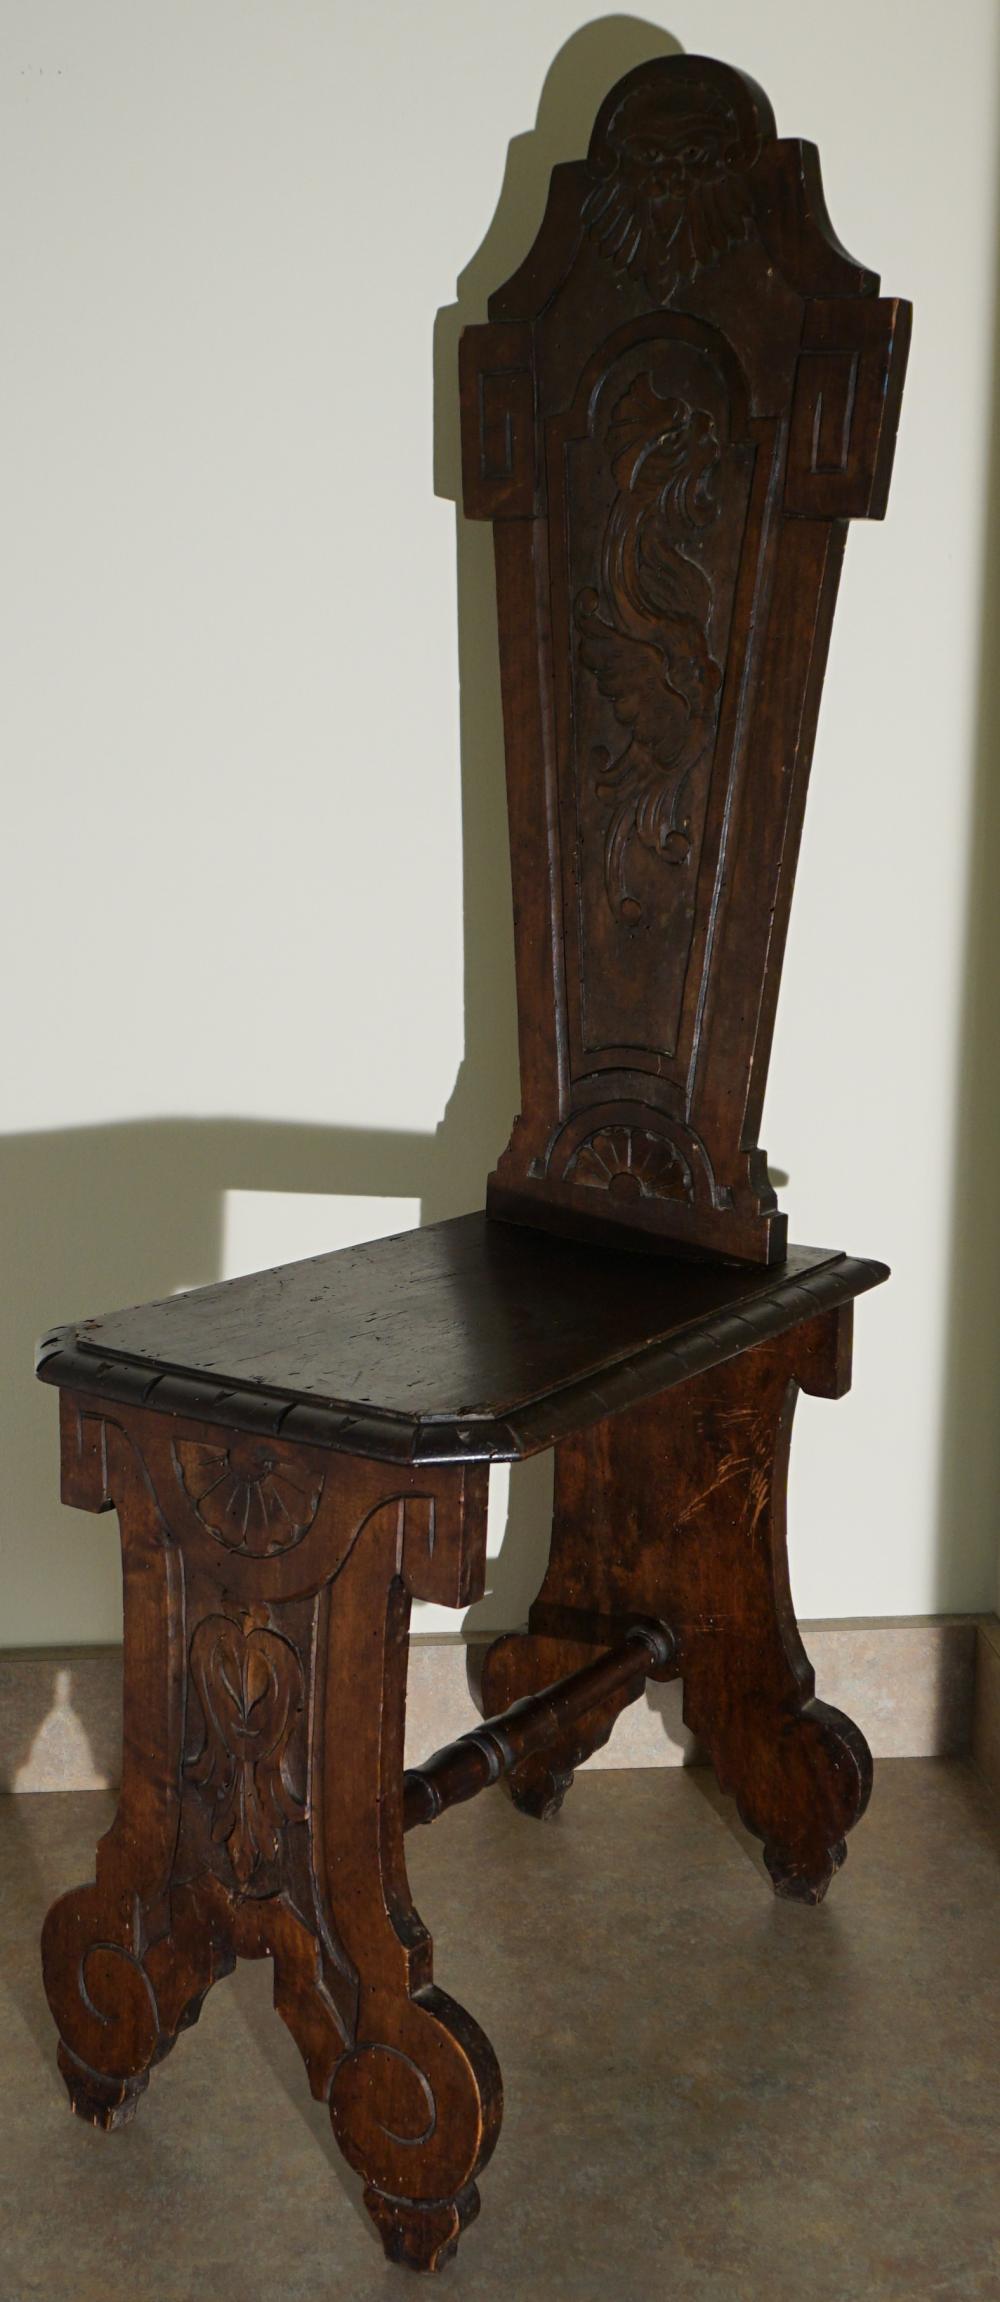 SCANDANAVIAN CARVED WOOD CHAIR,